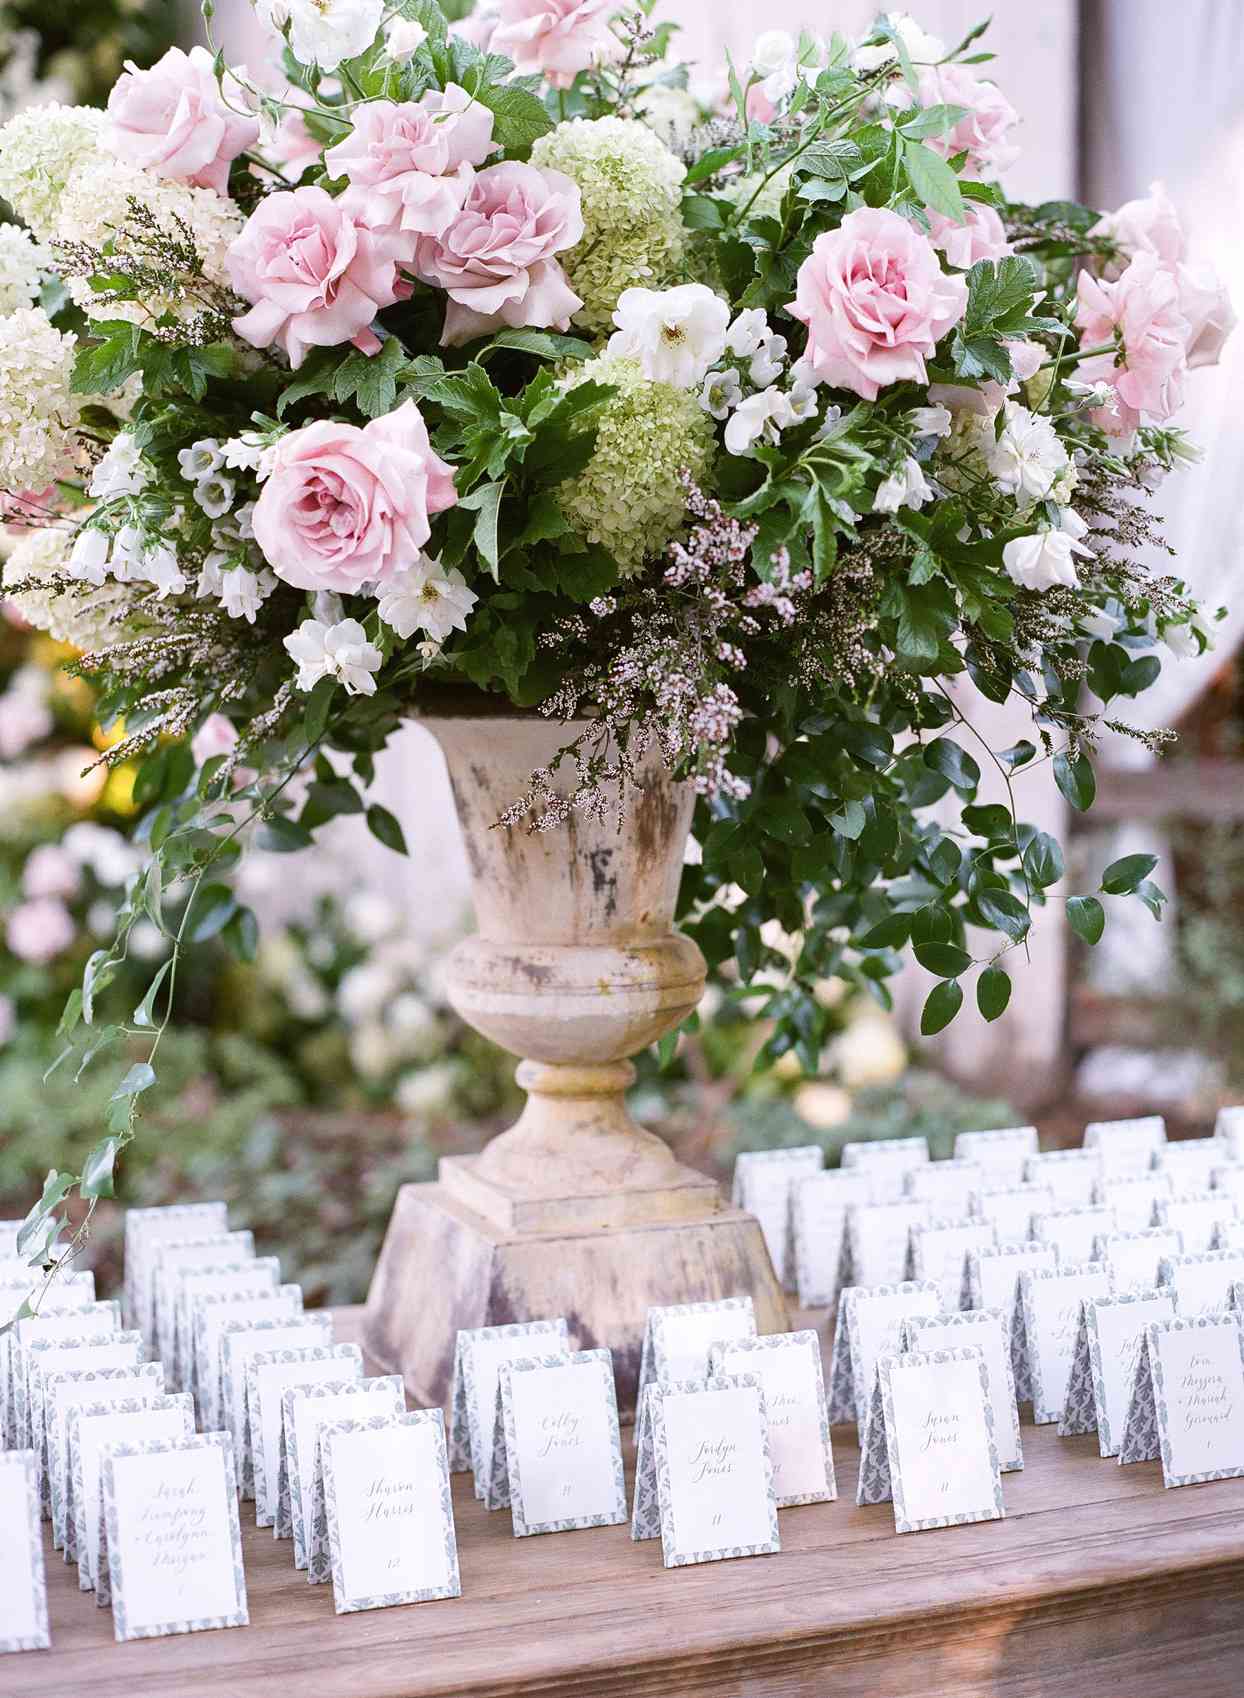 wooden table lined with white escort cards and pink floral arrangement